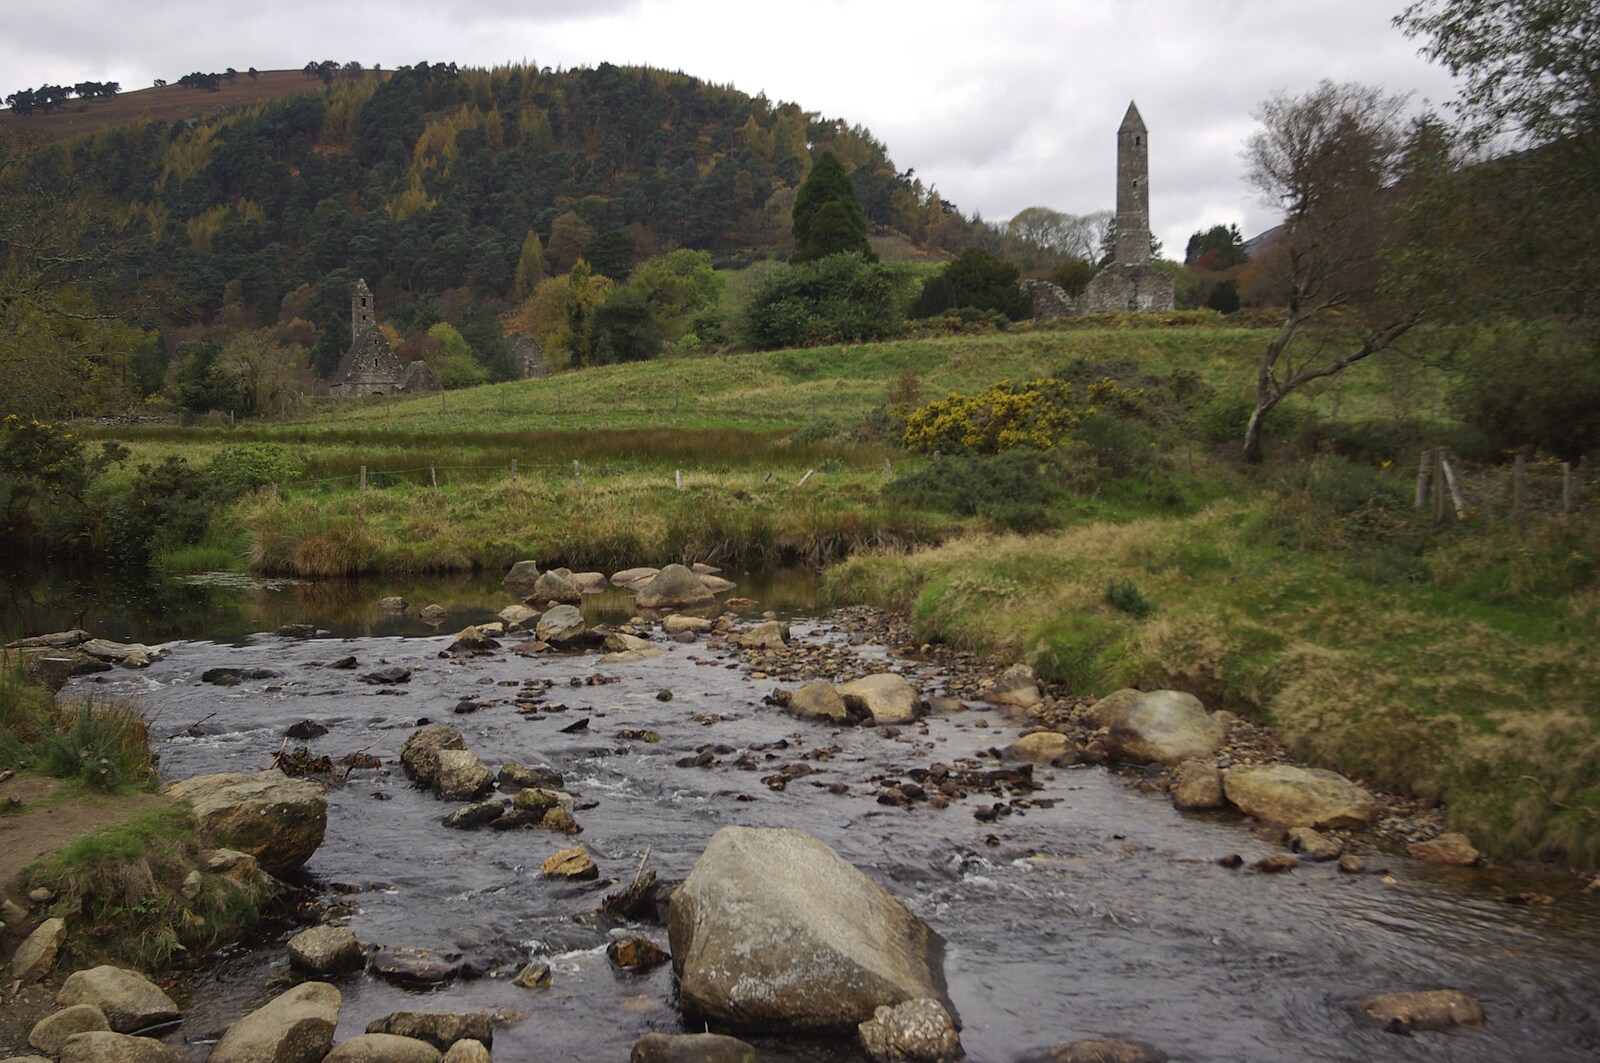 A view of the river, and monks' towers from Reflections: A Day at Glendalough, County Wicklow, Ireland - 3rd November 2007